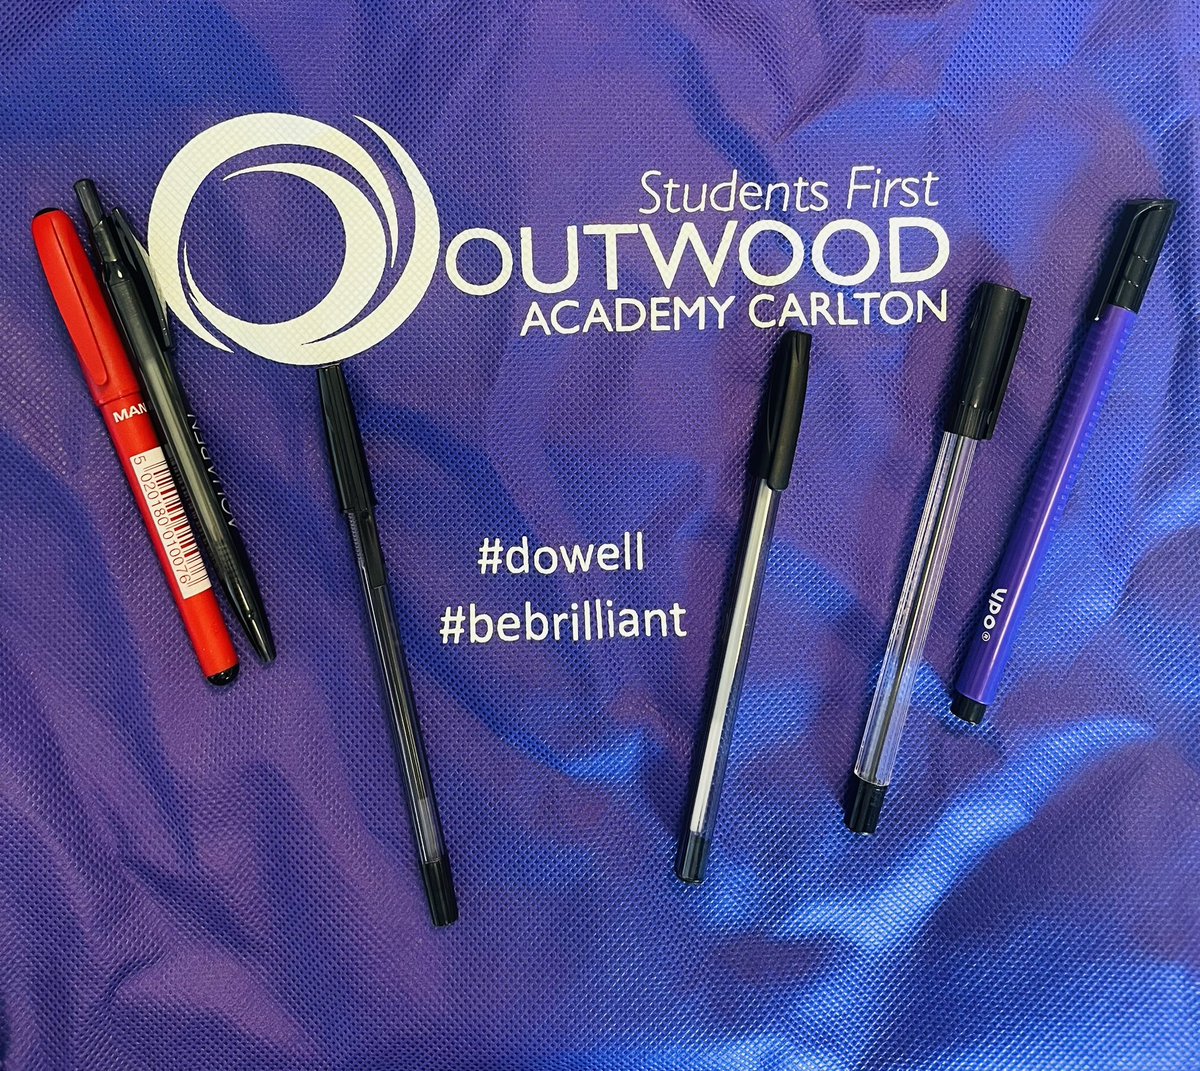 As part of our commitment to provide an environment conducive to success in exams, our Y11 cohort will get to pick their favourite type of pen and they’ll be provided with it for every exam. #MarginalGains #Care #SweatTheSmallStuff